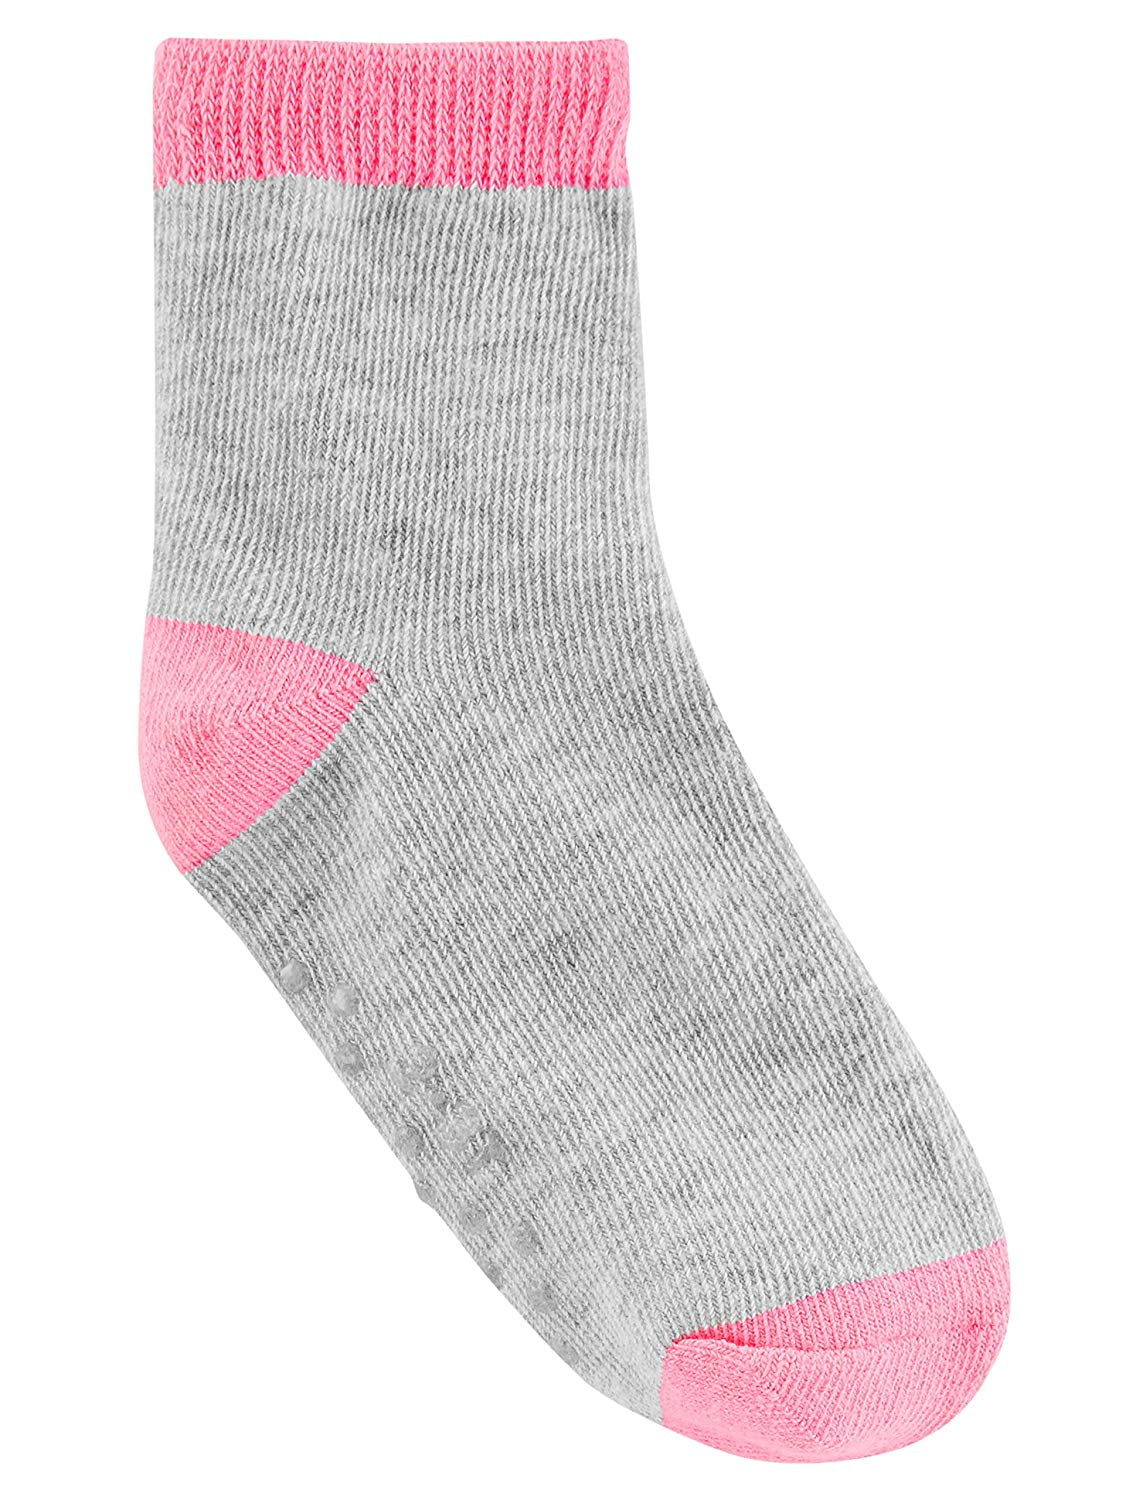 4T/5T Pink/Gray/White Simple Joys by Carters Baby Girls Toddler 12-Pack Socks